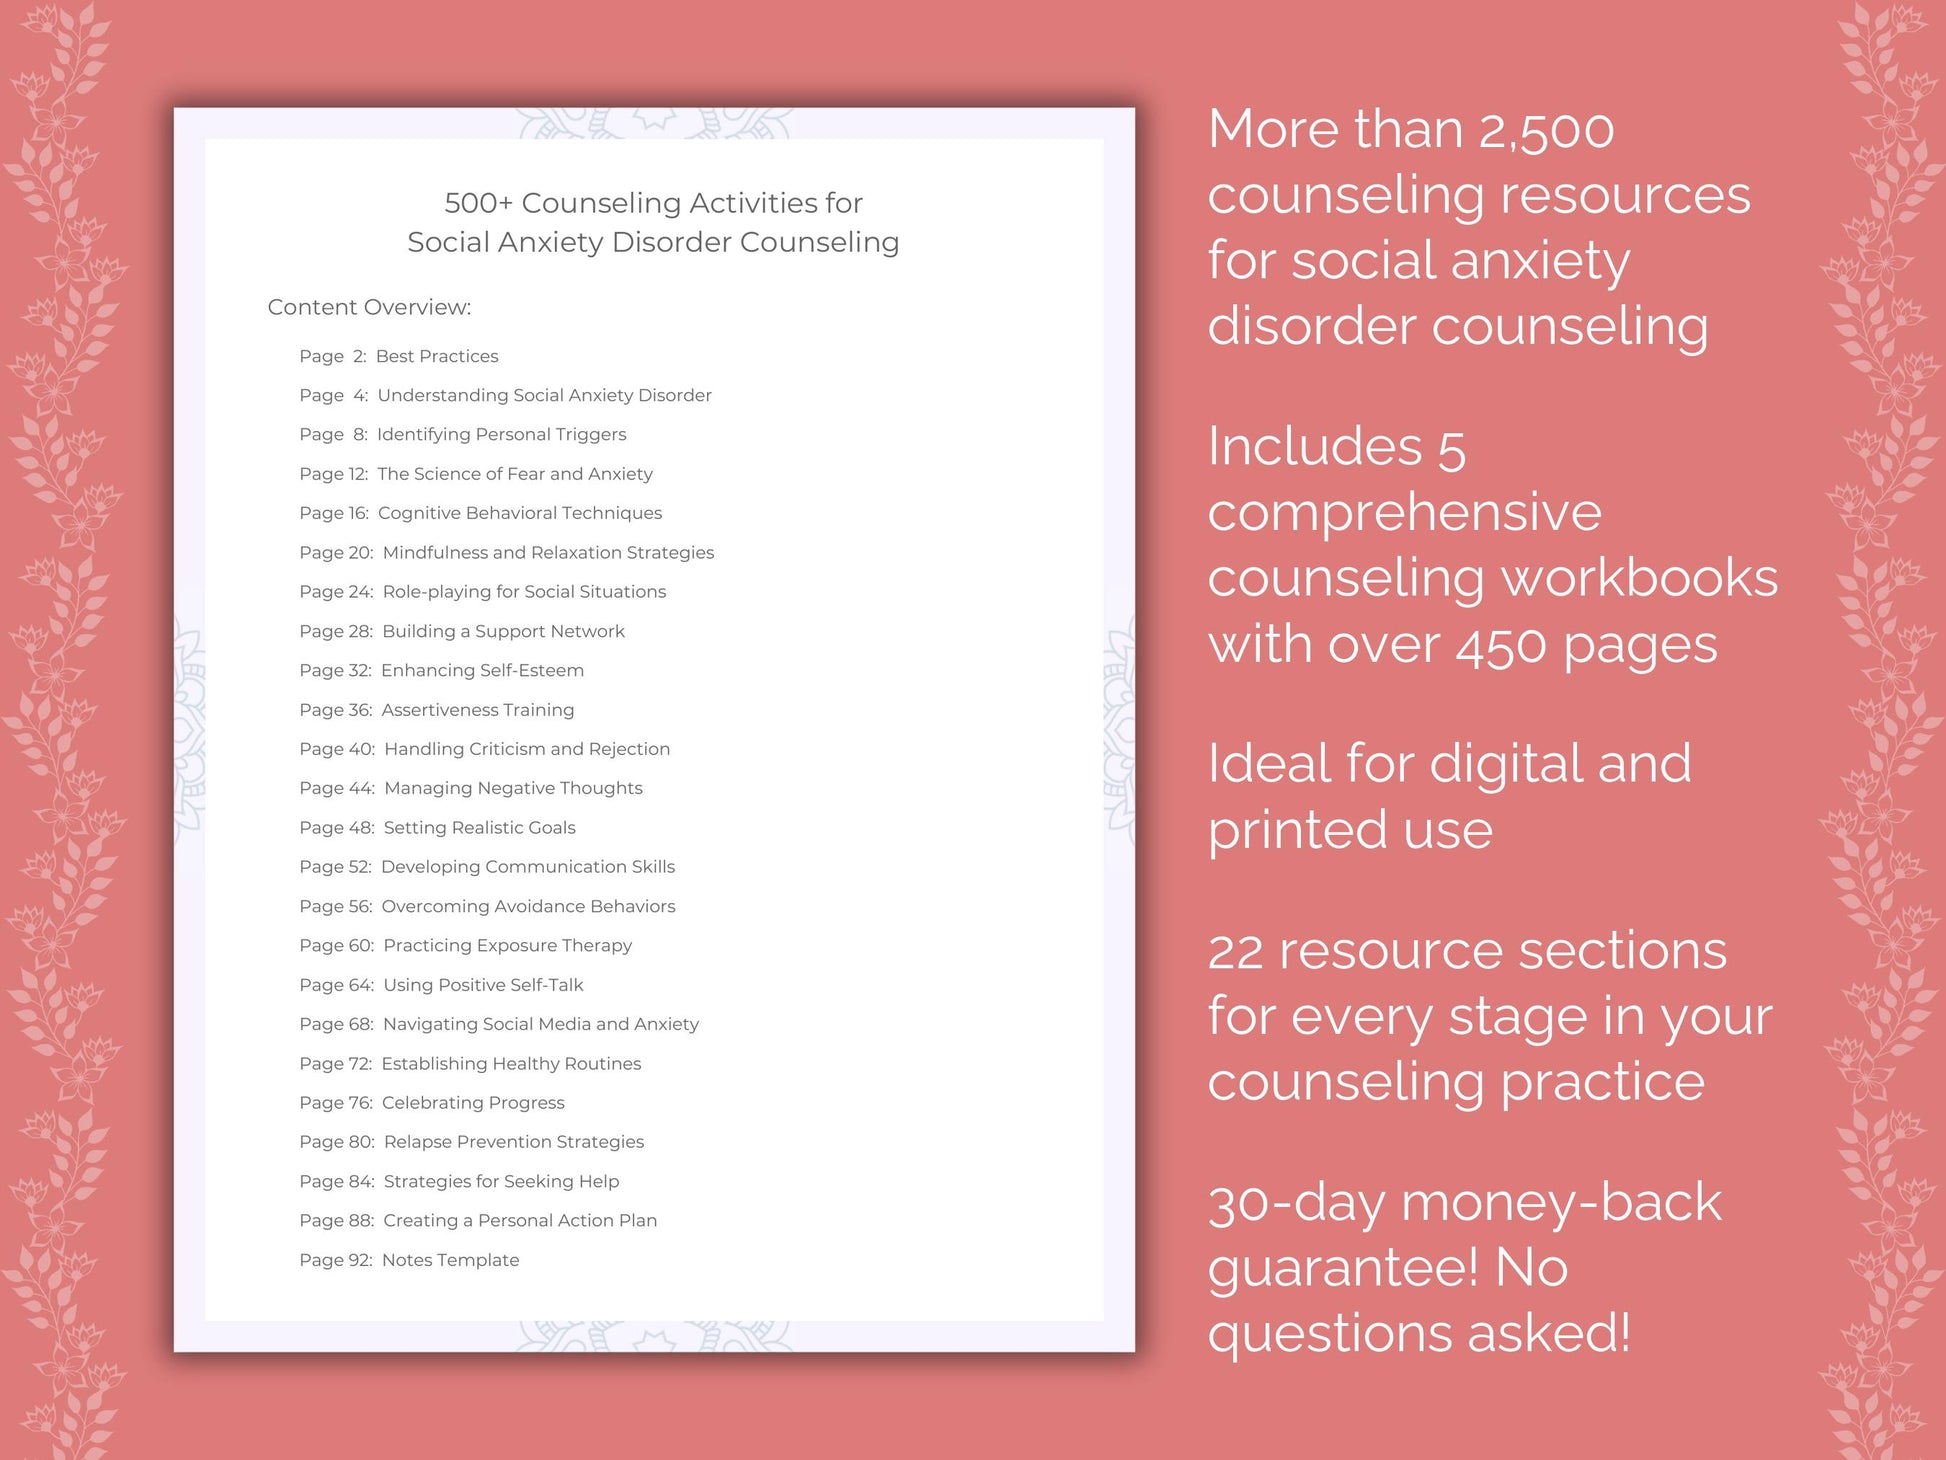 Disorder, Social Workbook, Counselor, Social Counseling, Social Template, Therapist, Social Bundle, Mental Health, Social Idea, Social Resource, Anxiety, Social Worksheet, Social Therapy